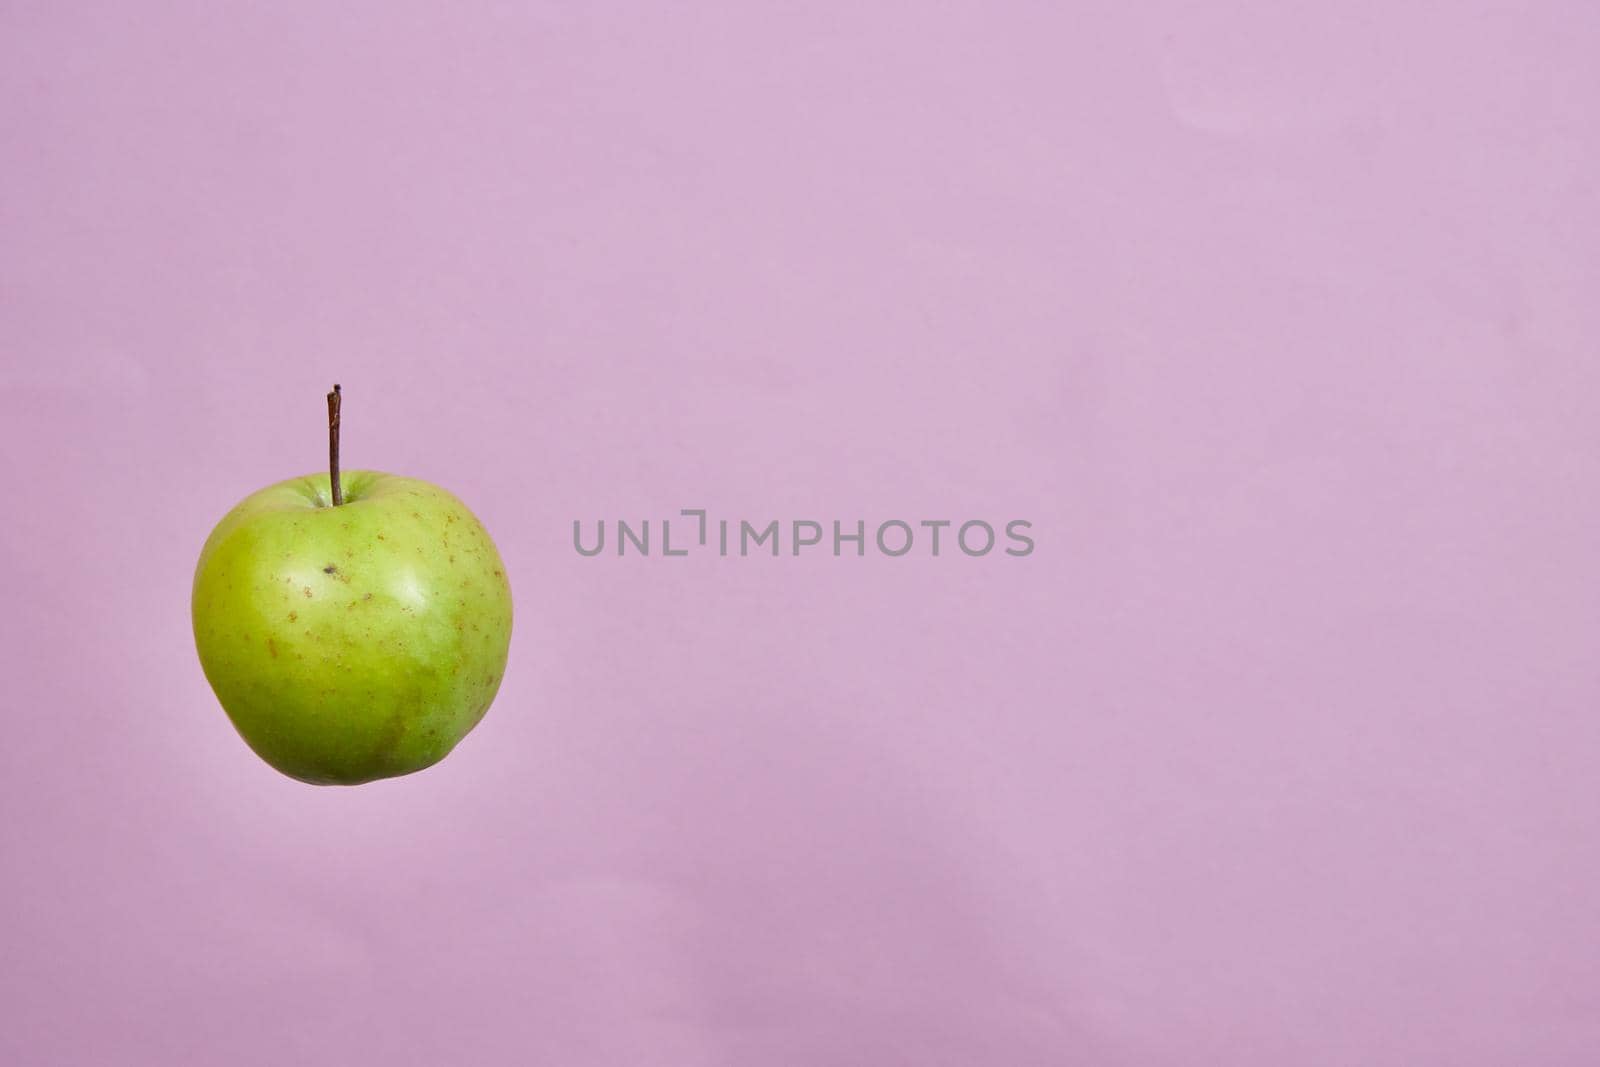 three green apples spinning on a pink background by vadiar